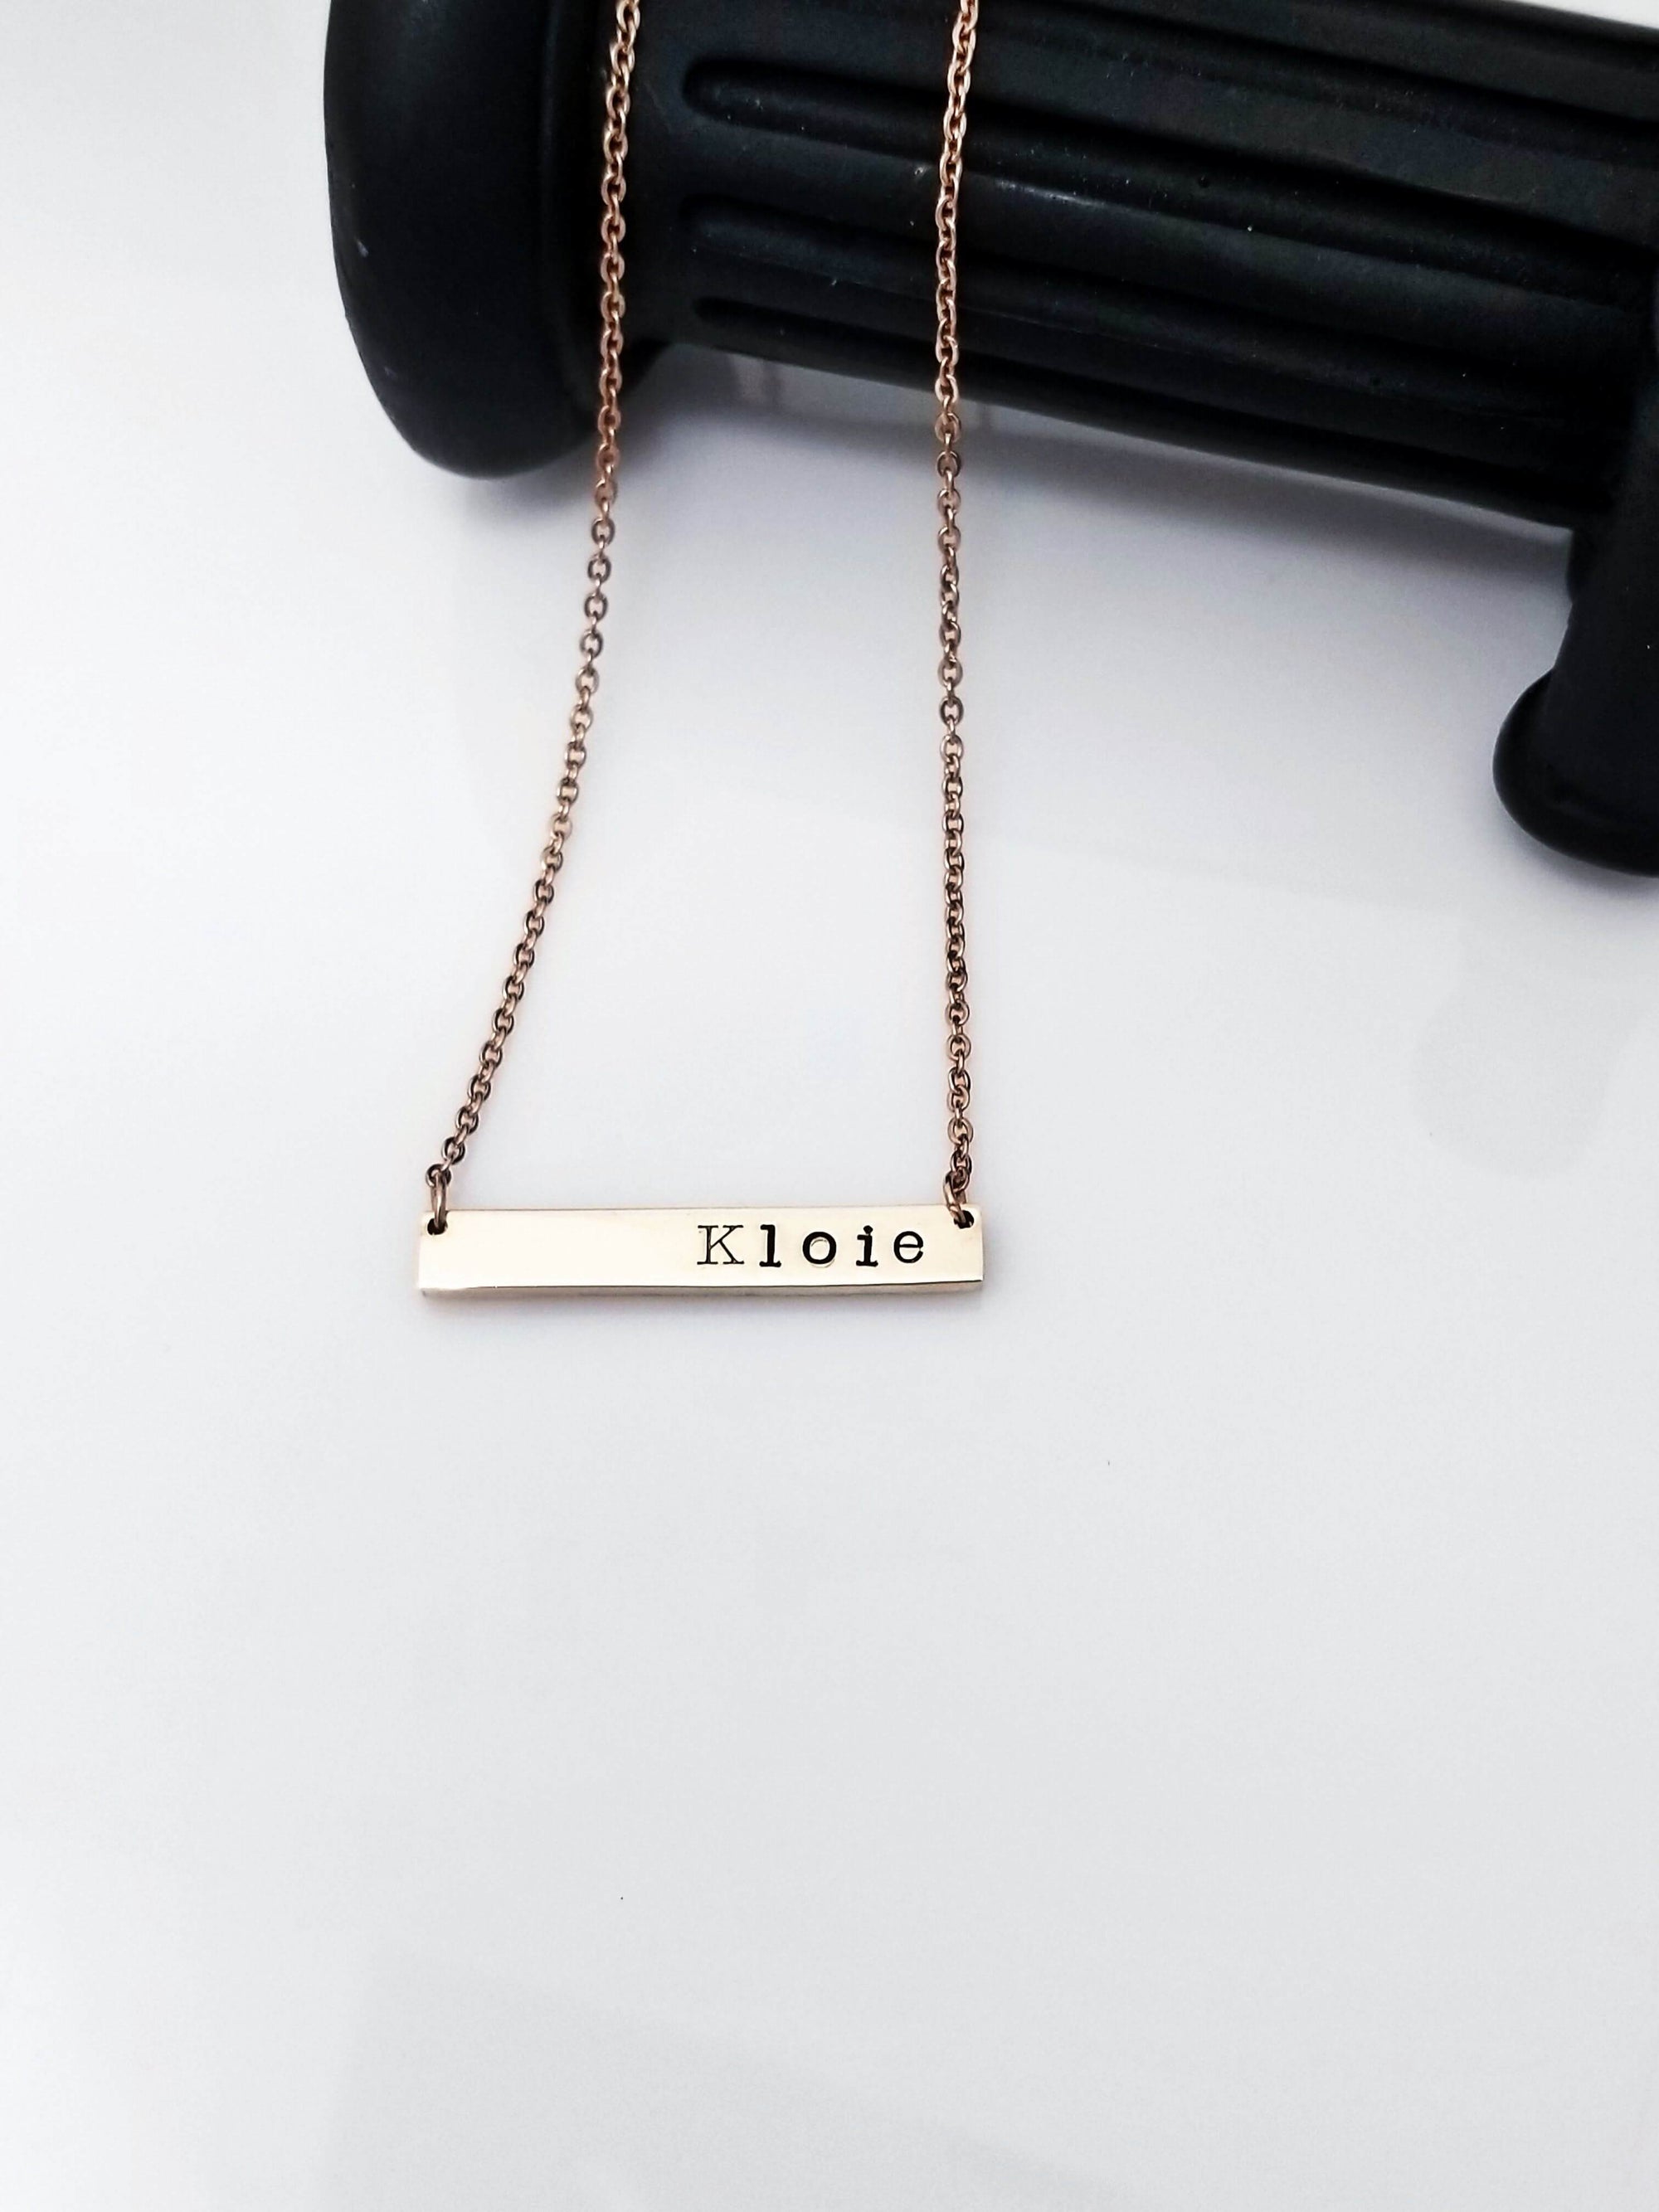 Cross Necklace, Christian Jewelry, Personalized Necklace, Silver Bar Necklace, Rose Gold Bar Necklace, Silver Cross Necklace, Forgiven